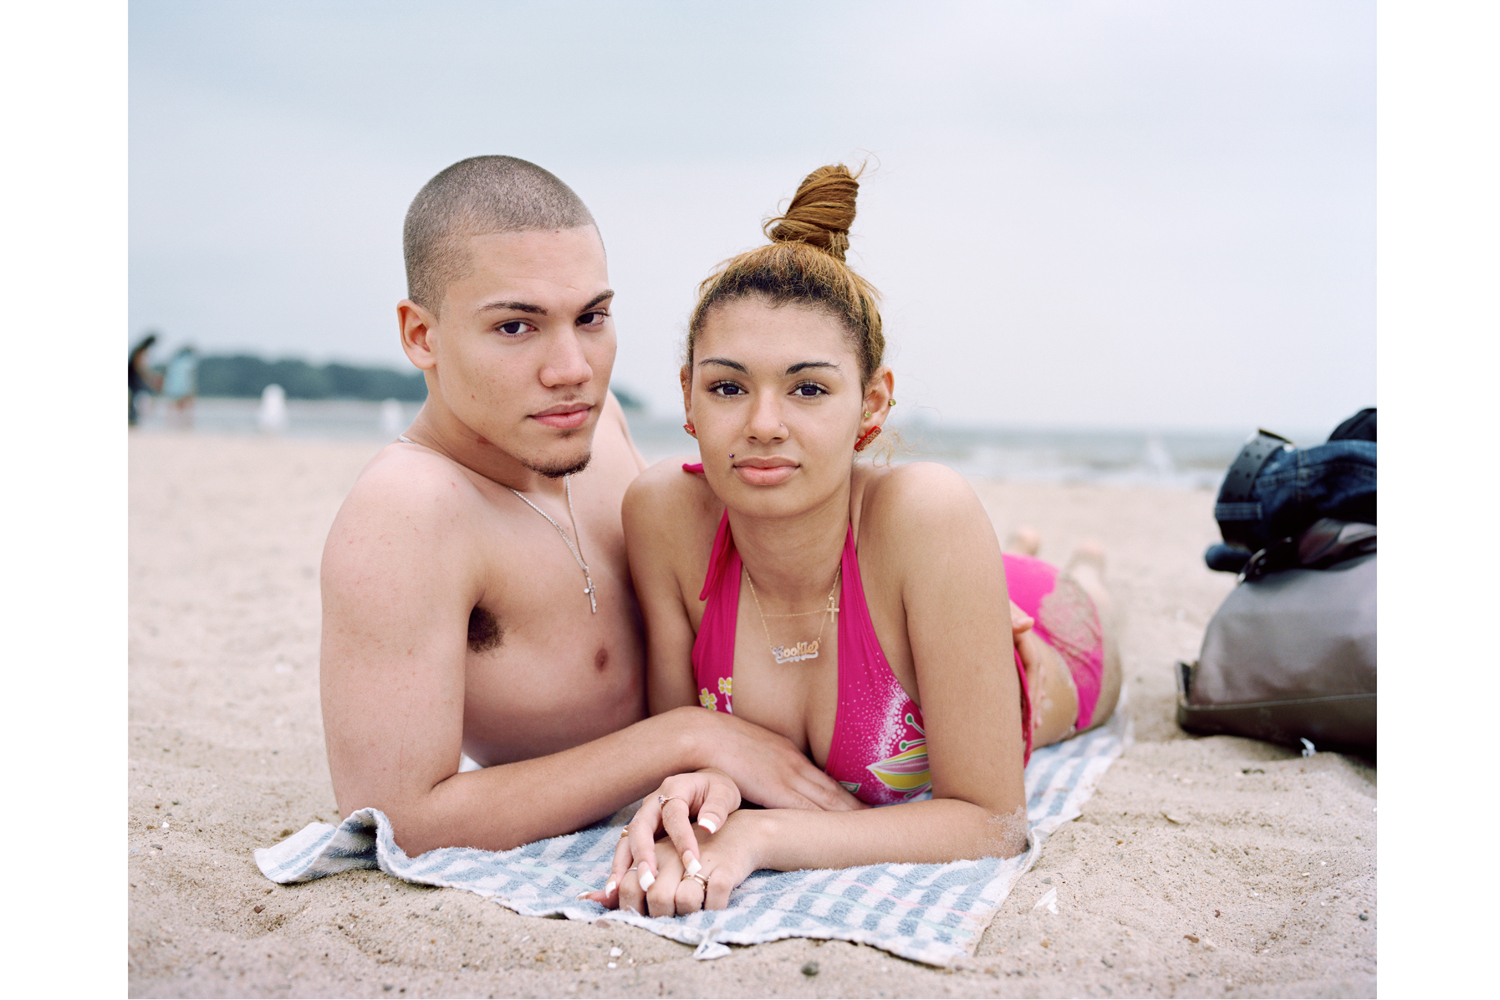 Lawrence's photographs capture an honest beauty and the vibrant spirit of summer in the Bronx. A wonderful and poignant portrait of the community! —Marie Tobias, associate photo editor, TIME